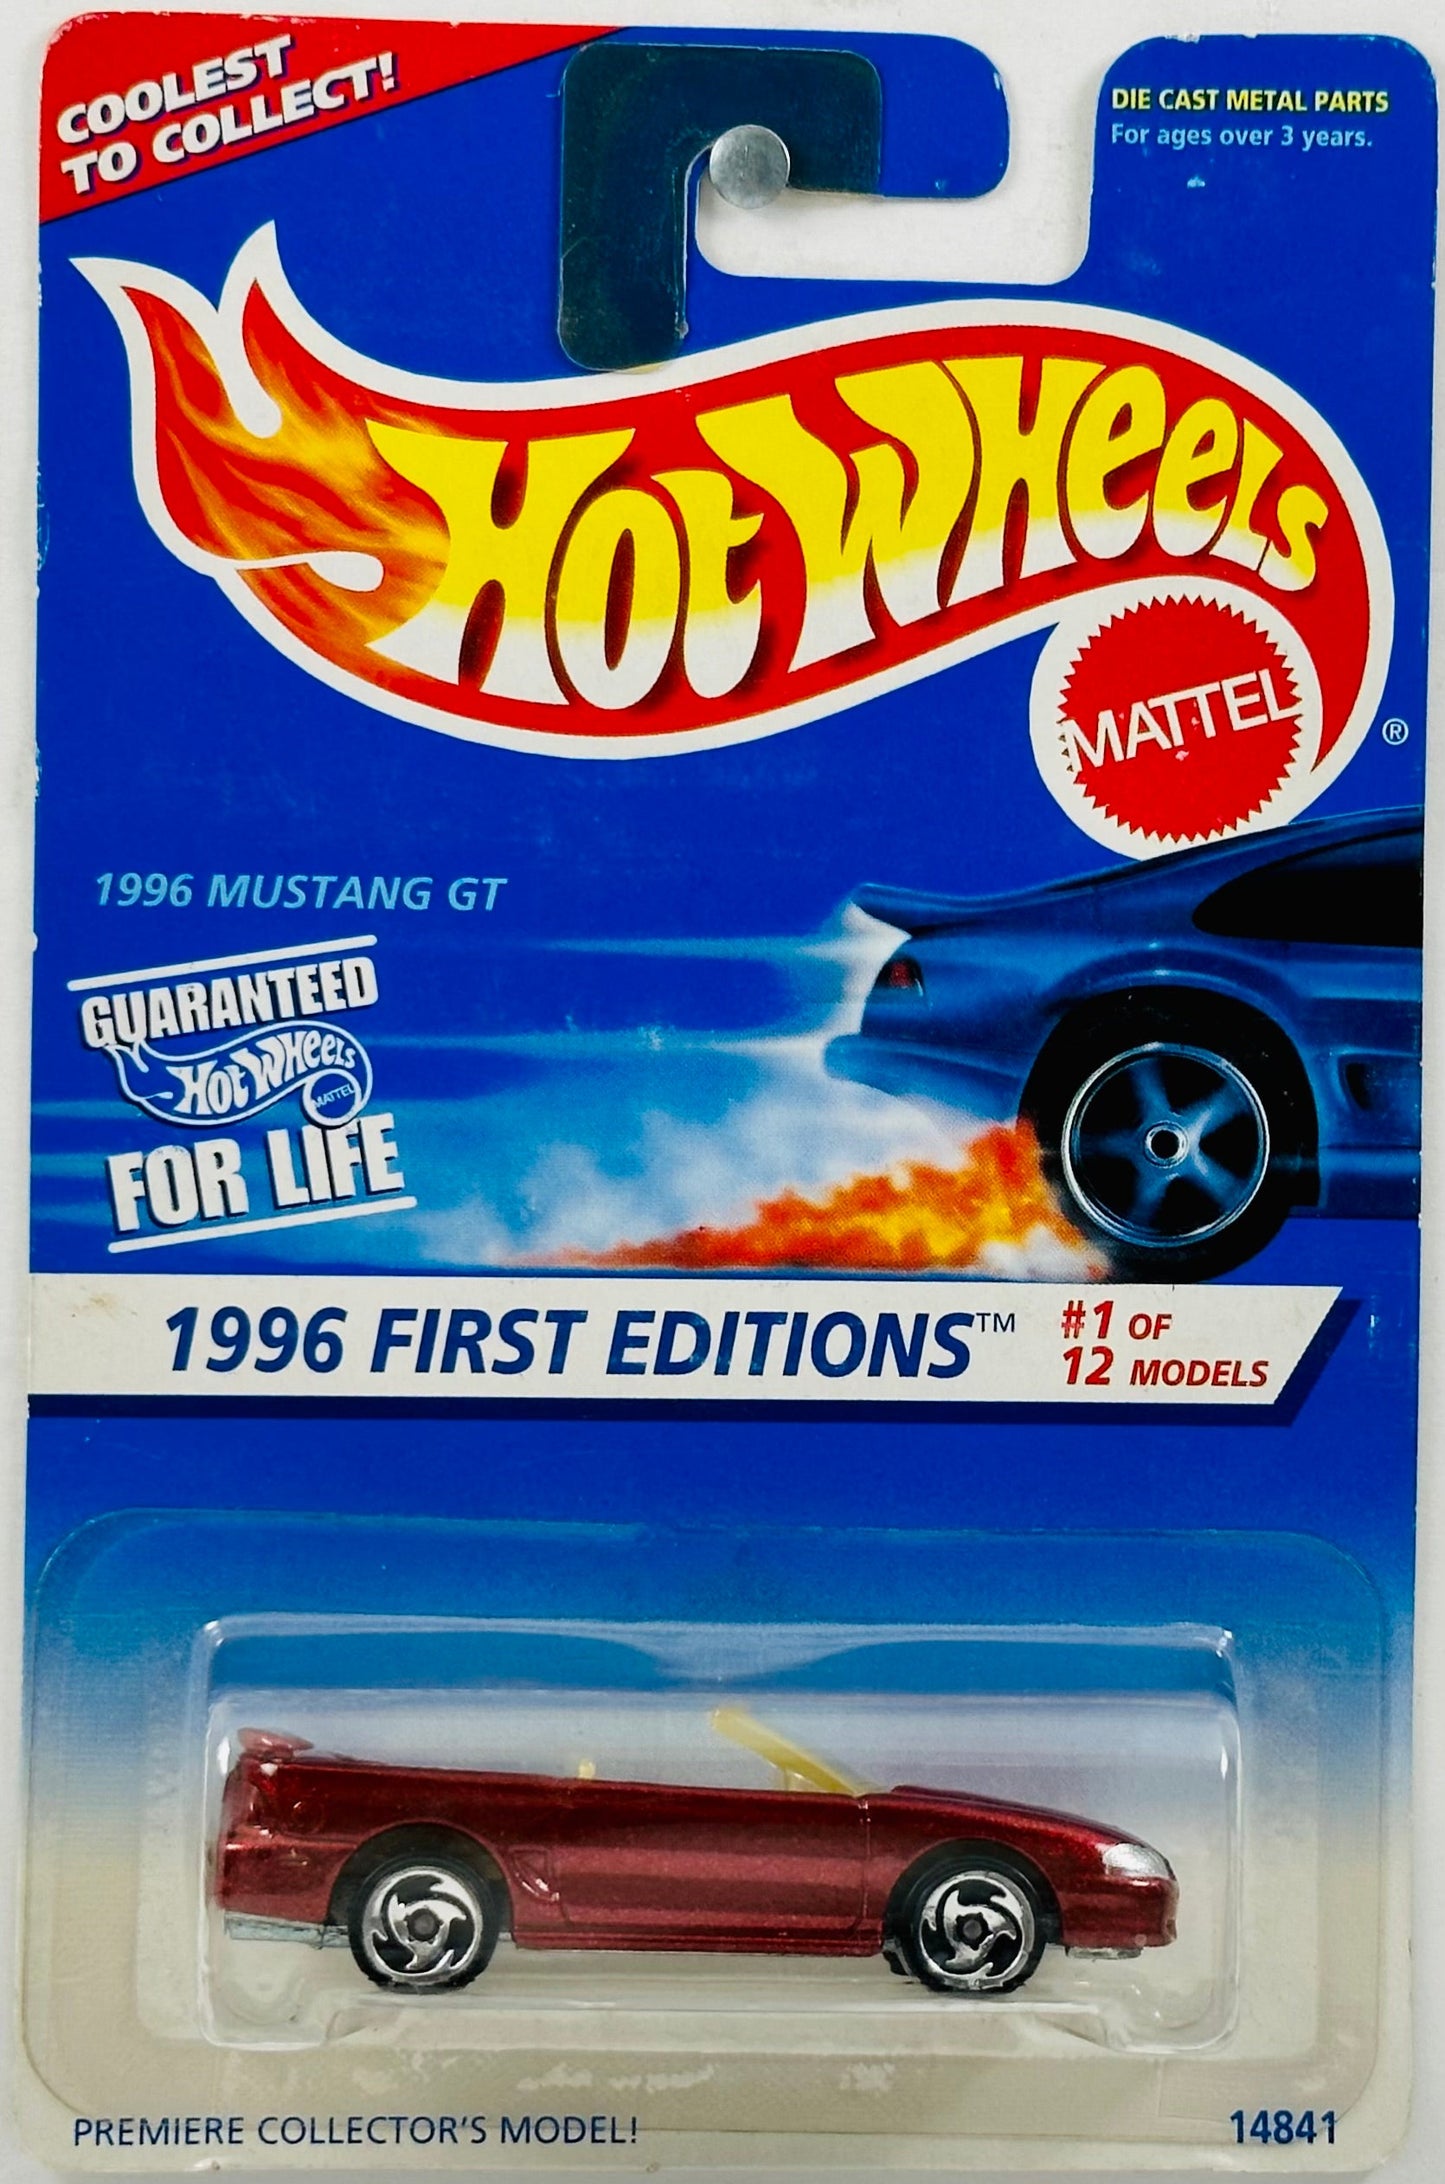 Hot Wheels 1996 - Collector # 378 - First Editions 1/12 - 1996 Mustang GT - Red - SB Wheels - USA with 'Coolest to Collect'